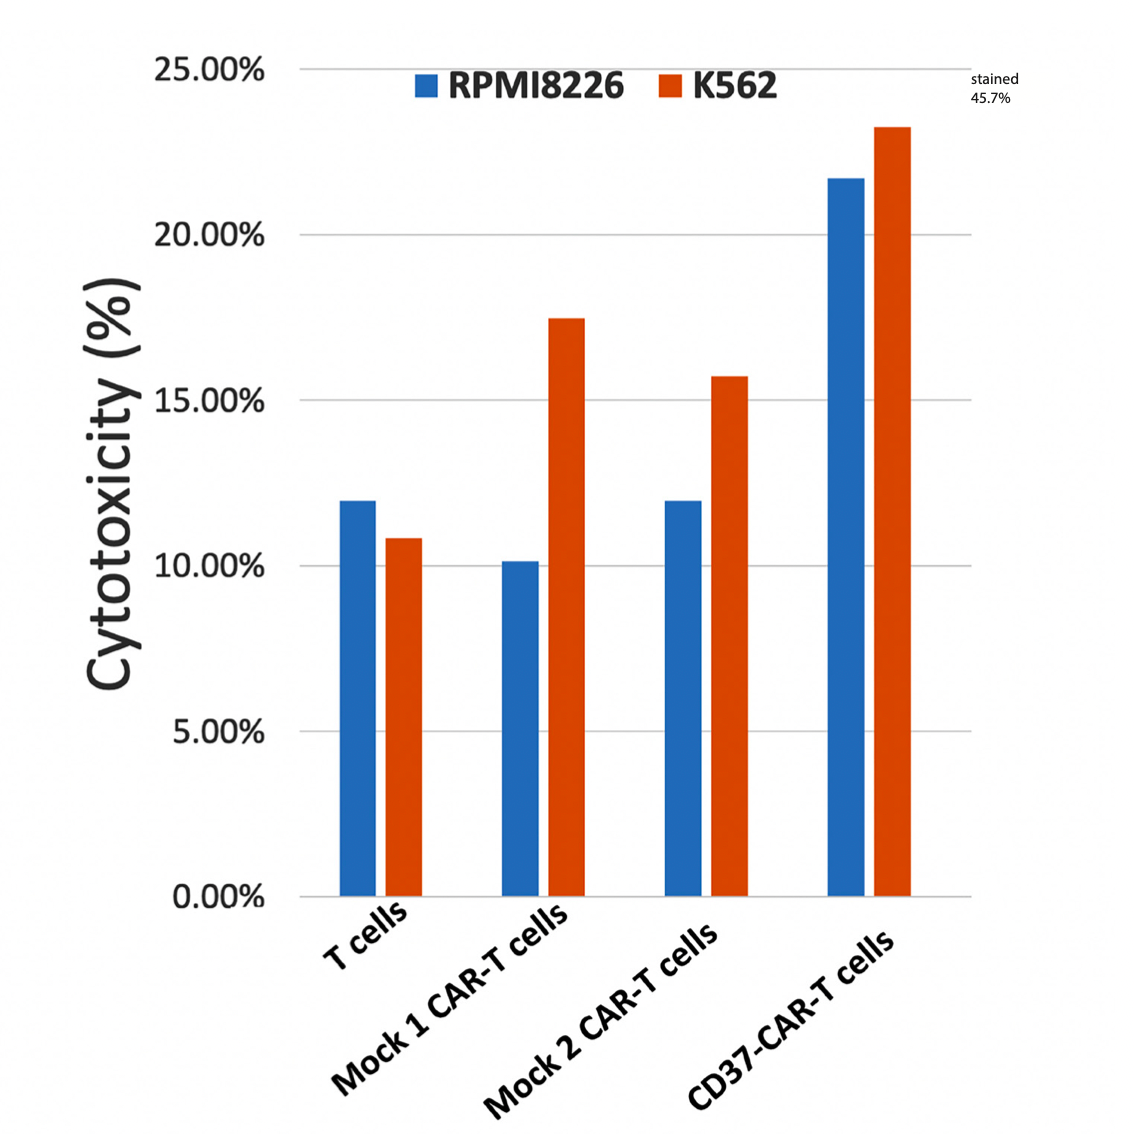 Figure 2. LDH (Lactate dehydrogenase) killing assay demonstrates cytotoxic activity of CD37-CAR-T cells against RPMI8226-positive for CD37.